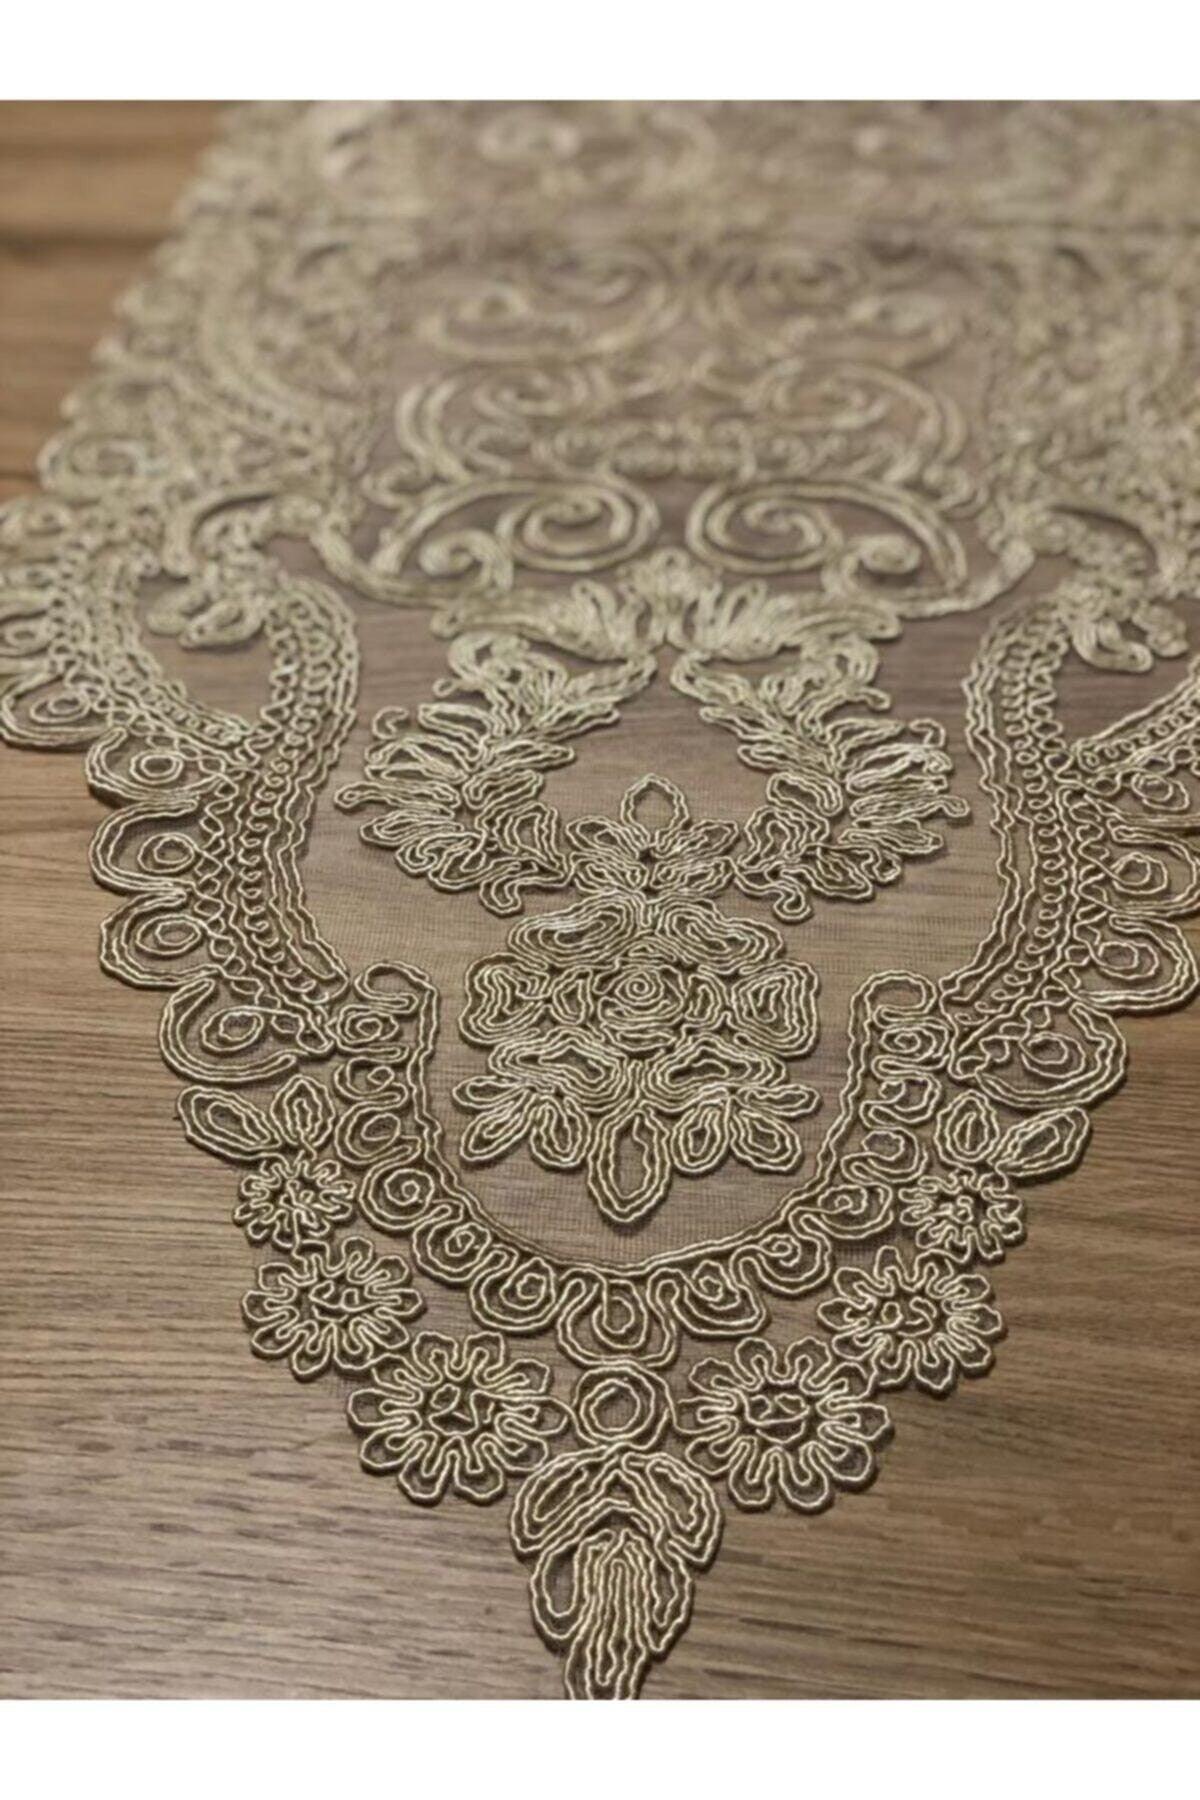 Lace Detailed Cappuccino Runner (110x35cm) - Swordslife